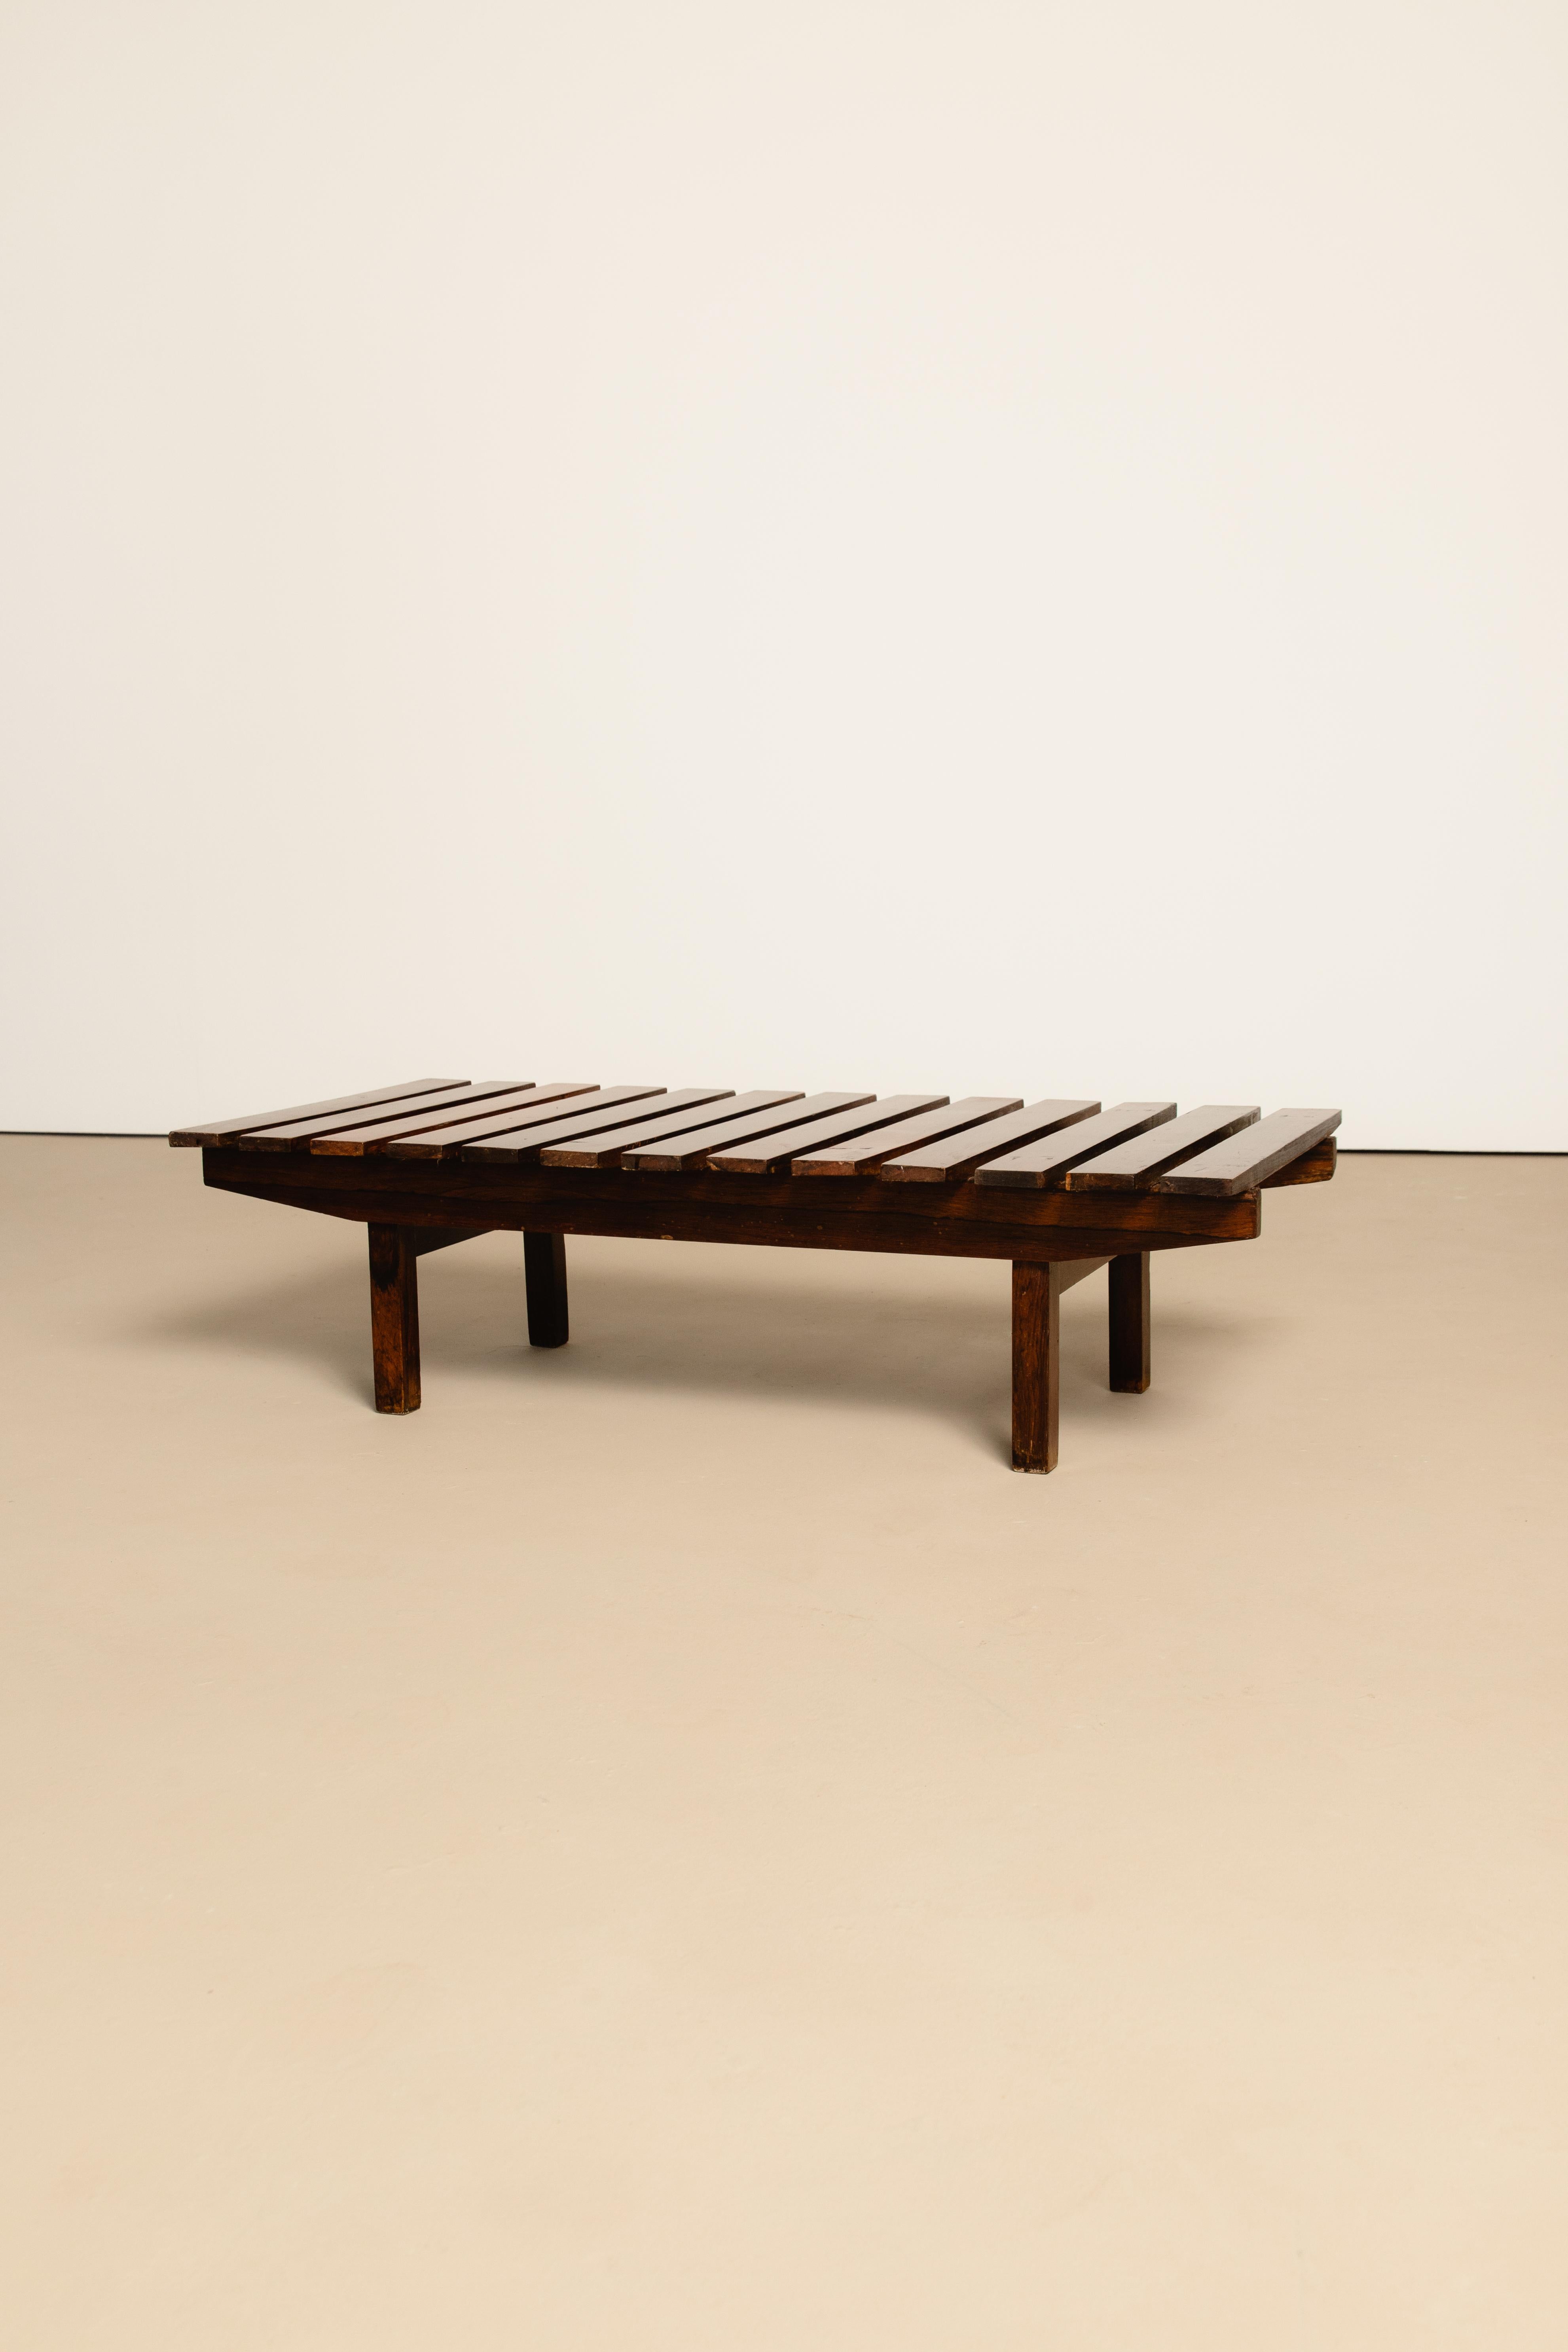 Brazilian midcentury bench in solid rosewood by unknown author. Can be used as a center table.